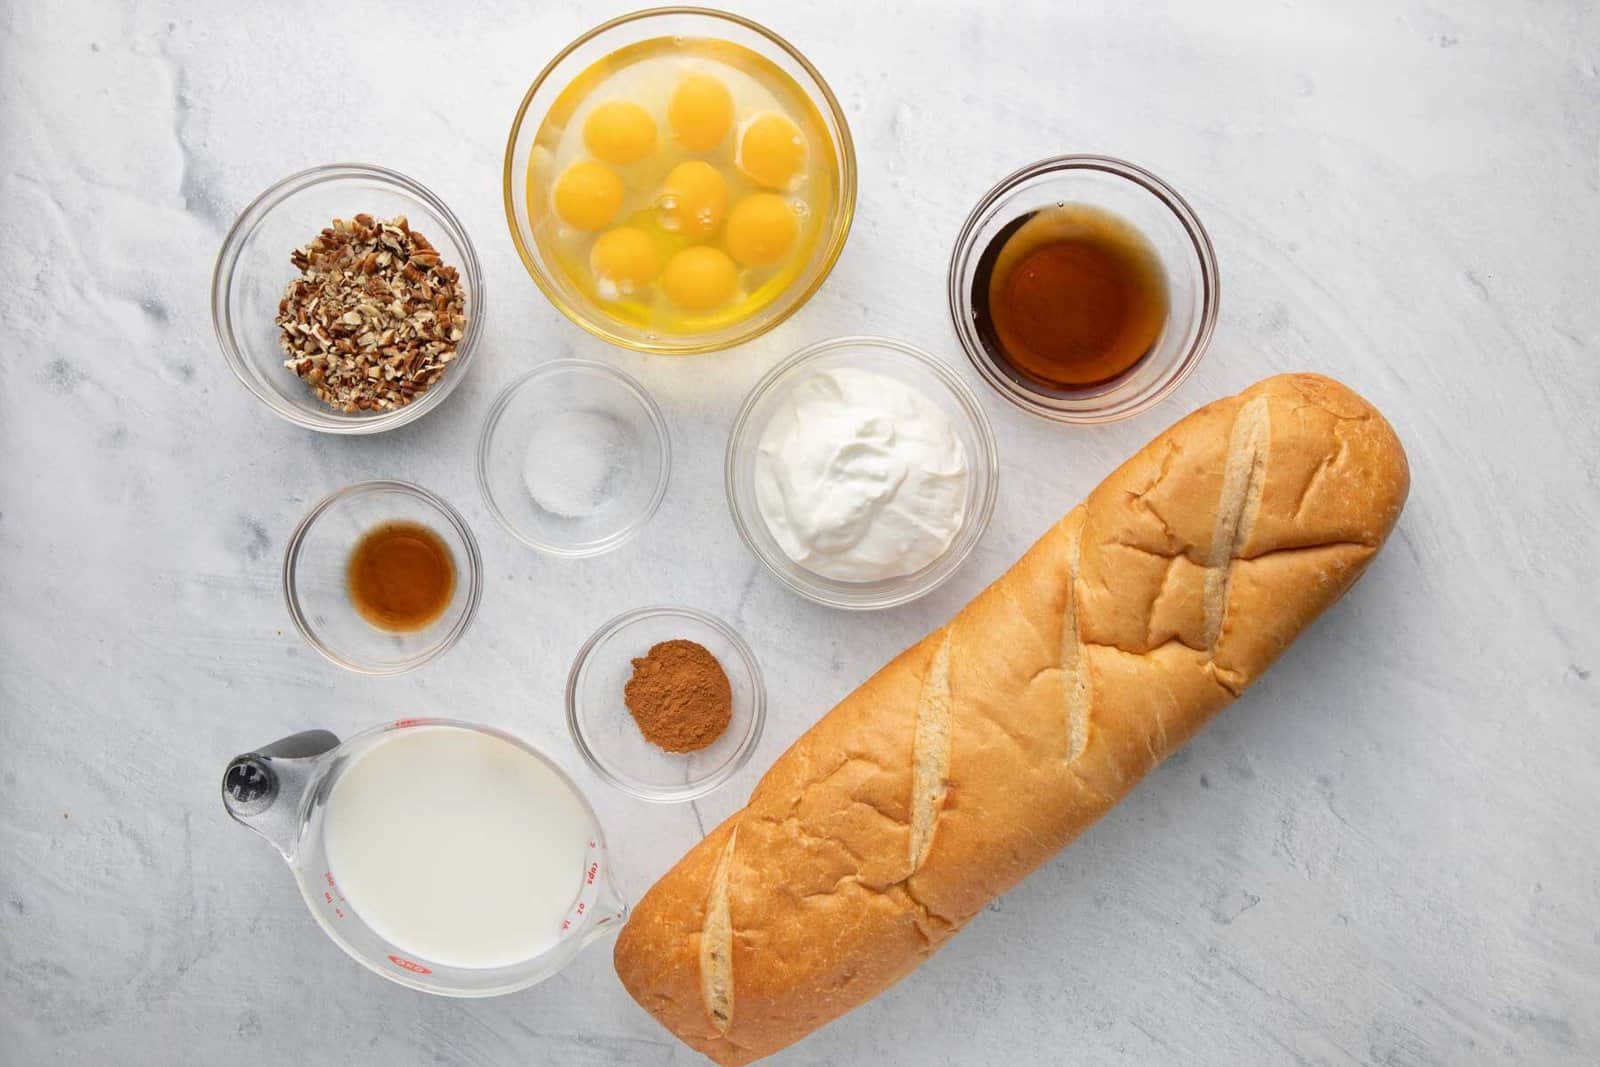 Ingredients for recipe in individual bowls: chopped pecans, vanilla, milk, salt, cracked eggs, cinnamin, yogurt, maple syrup, and a loaf of bread.